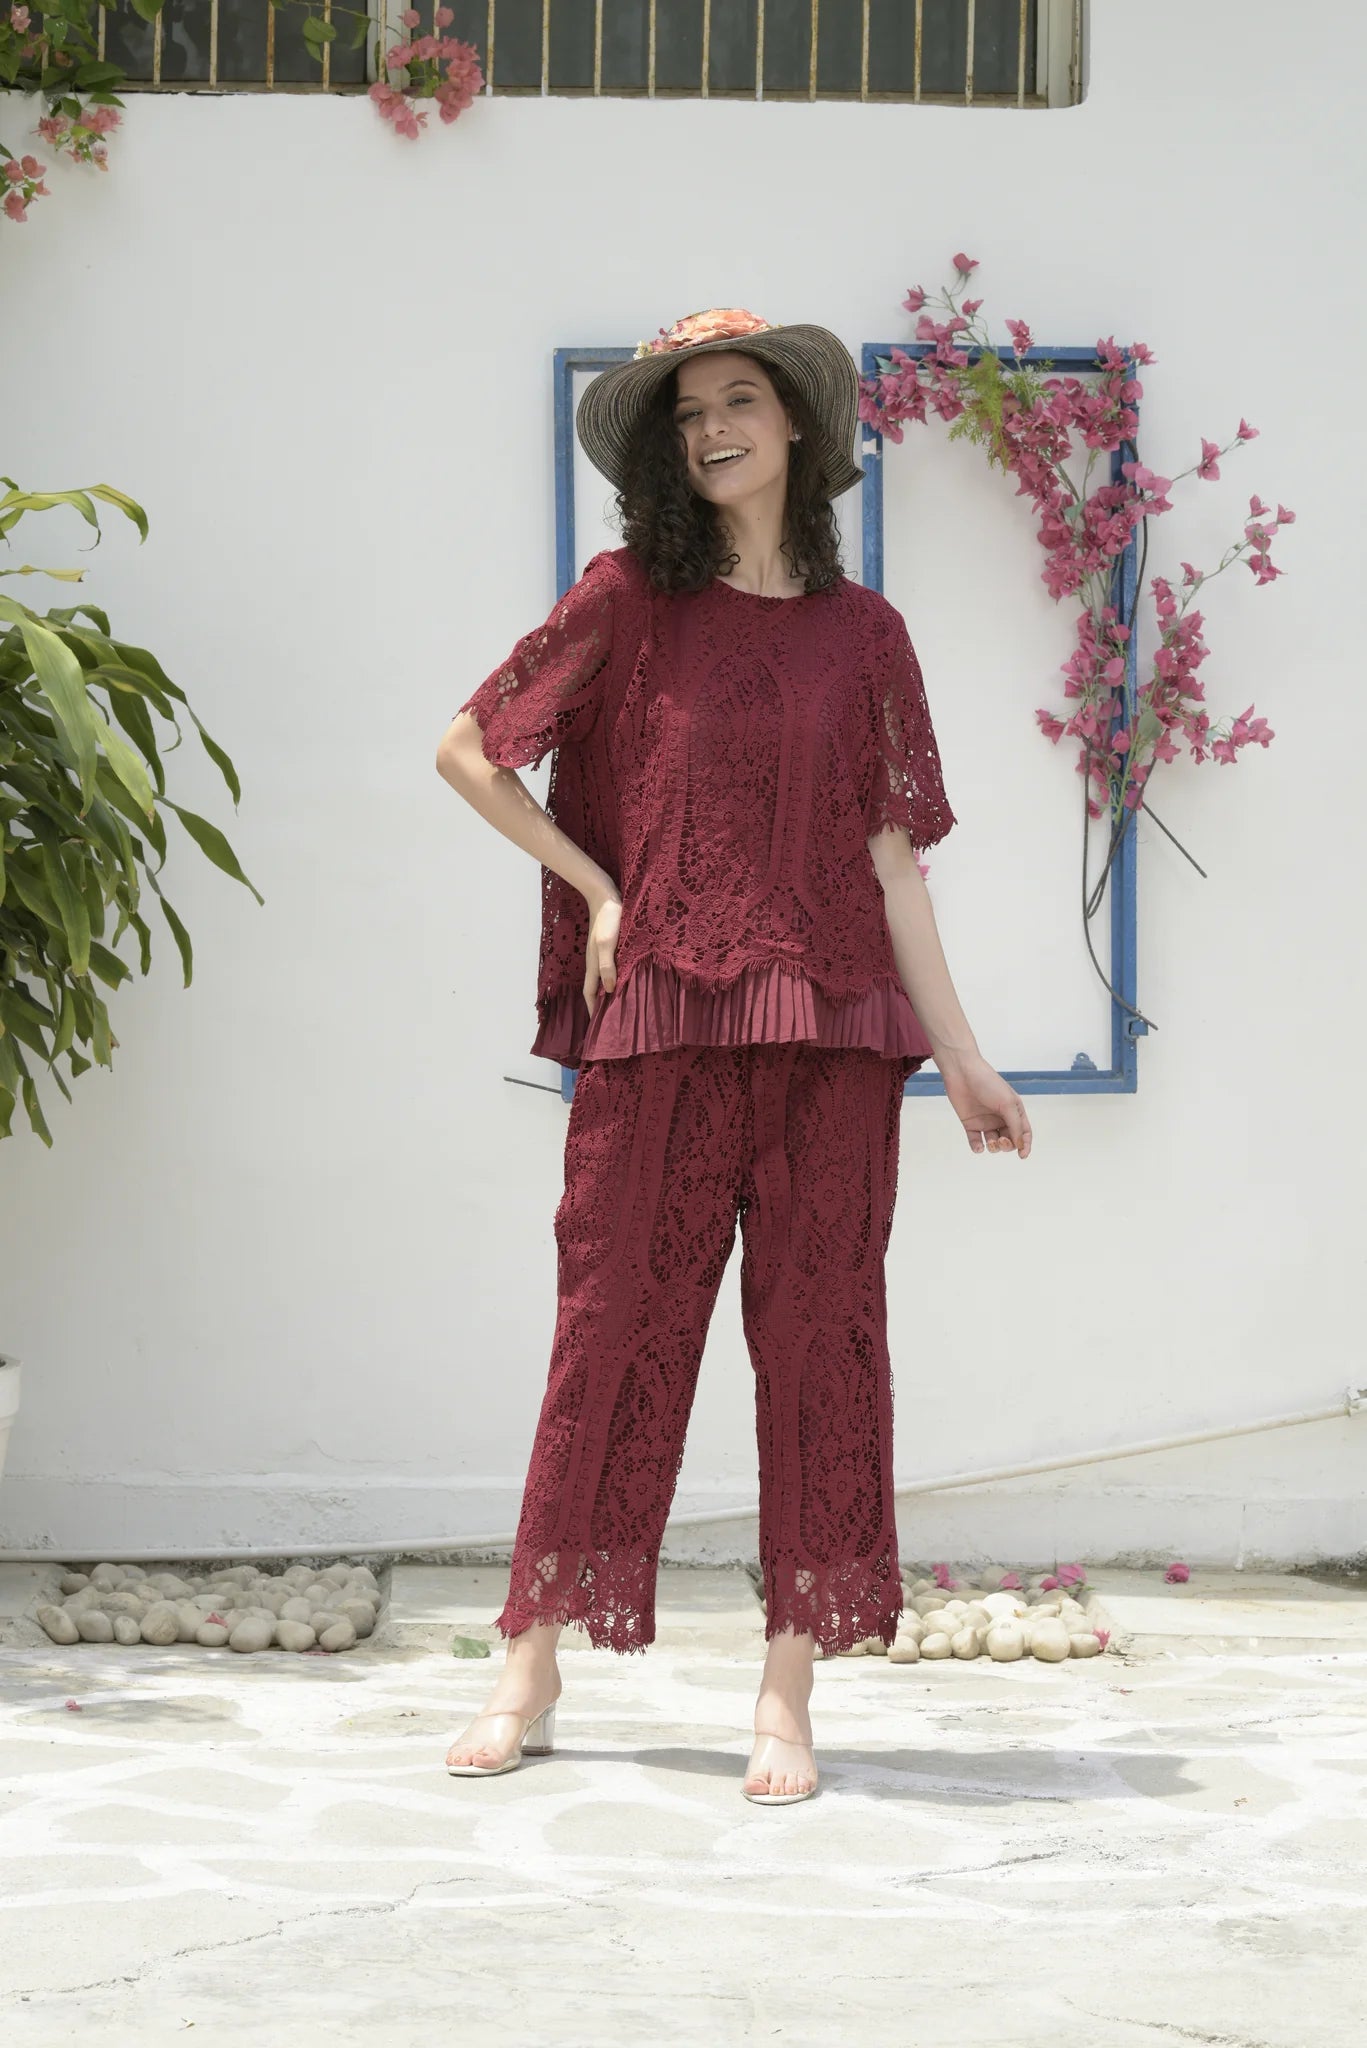 Image of Stand out from the crowd in this captivating MYRA Mesh Cross Back Co-Ord Set, featuring a stylish maroon hue. The bold look and lightweight fabric will make the perfect statement for any occasion. Dare to be different and make heads turn!  From savoirfashions.com